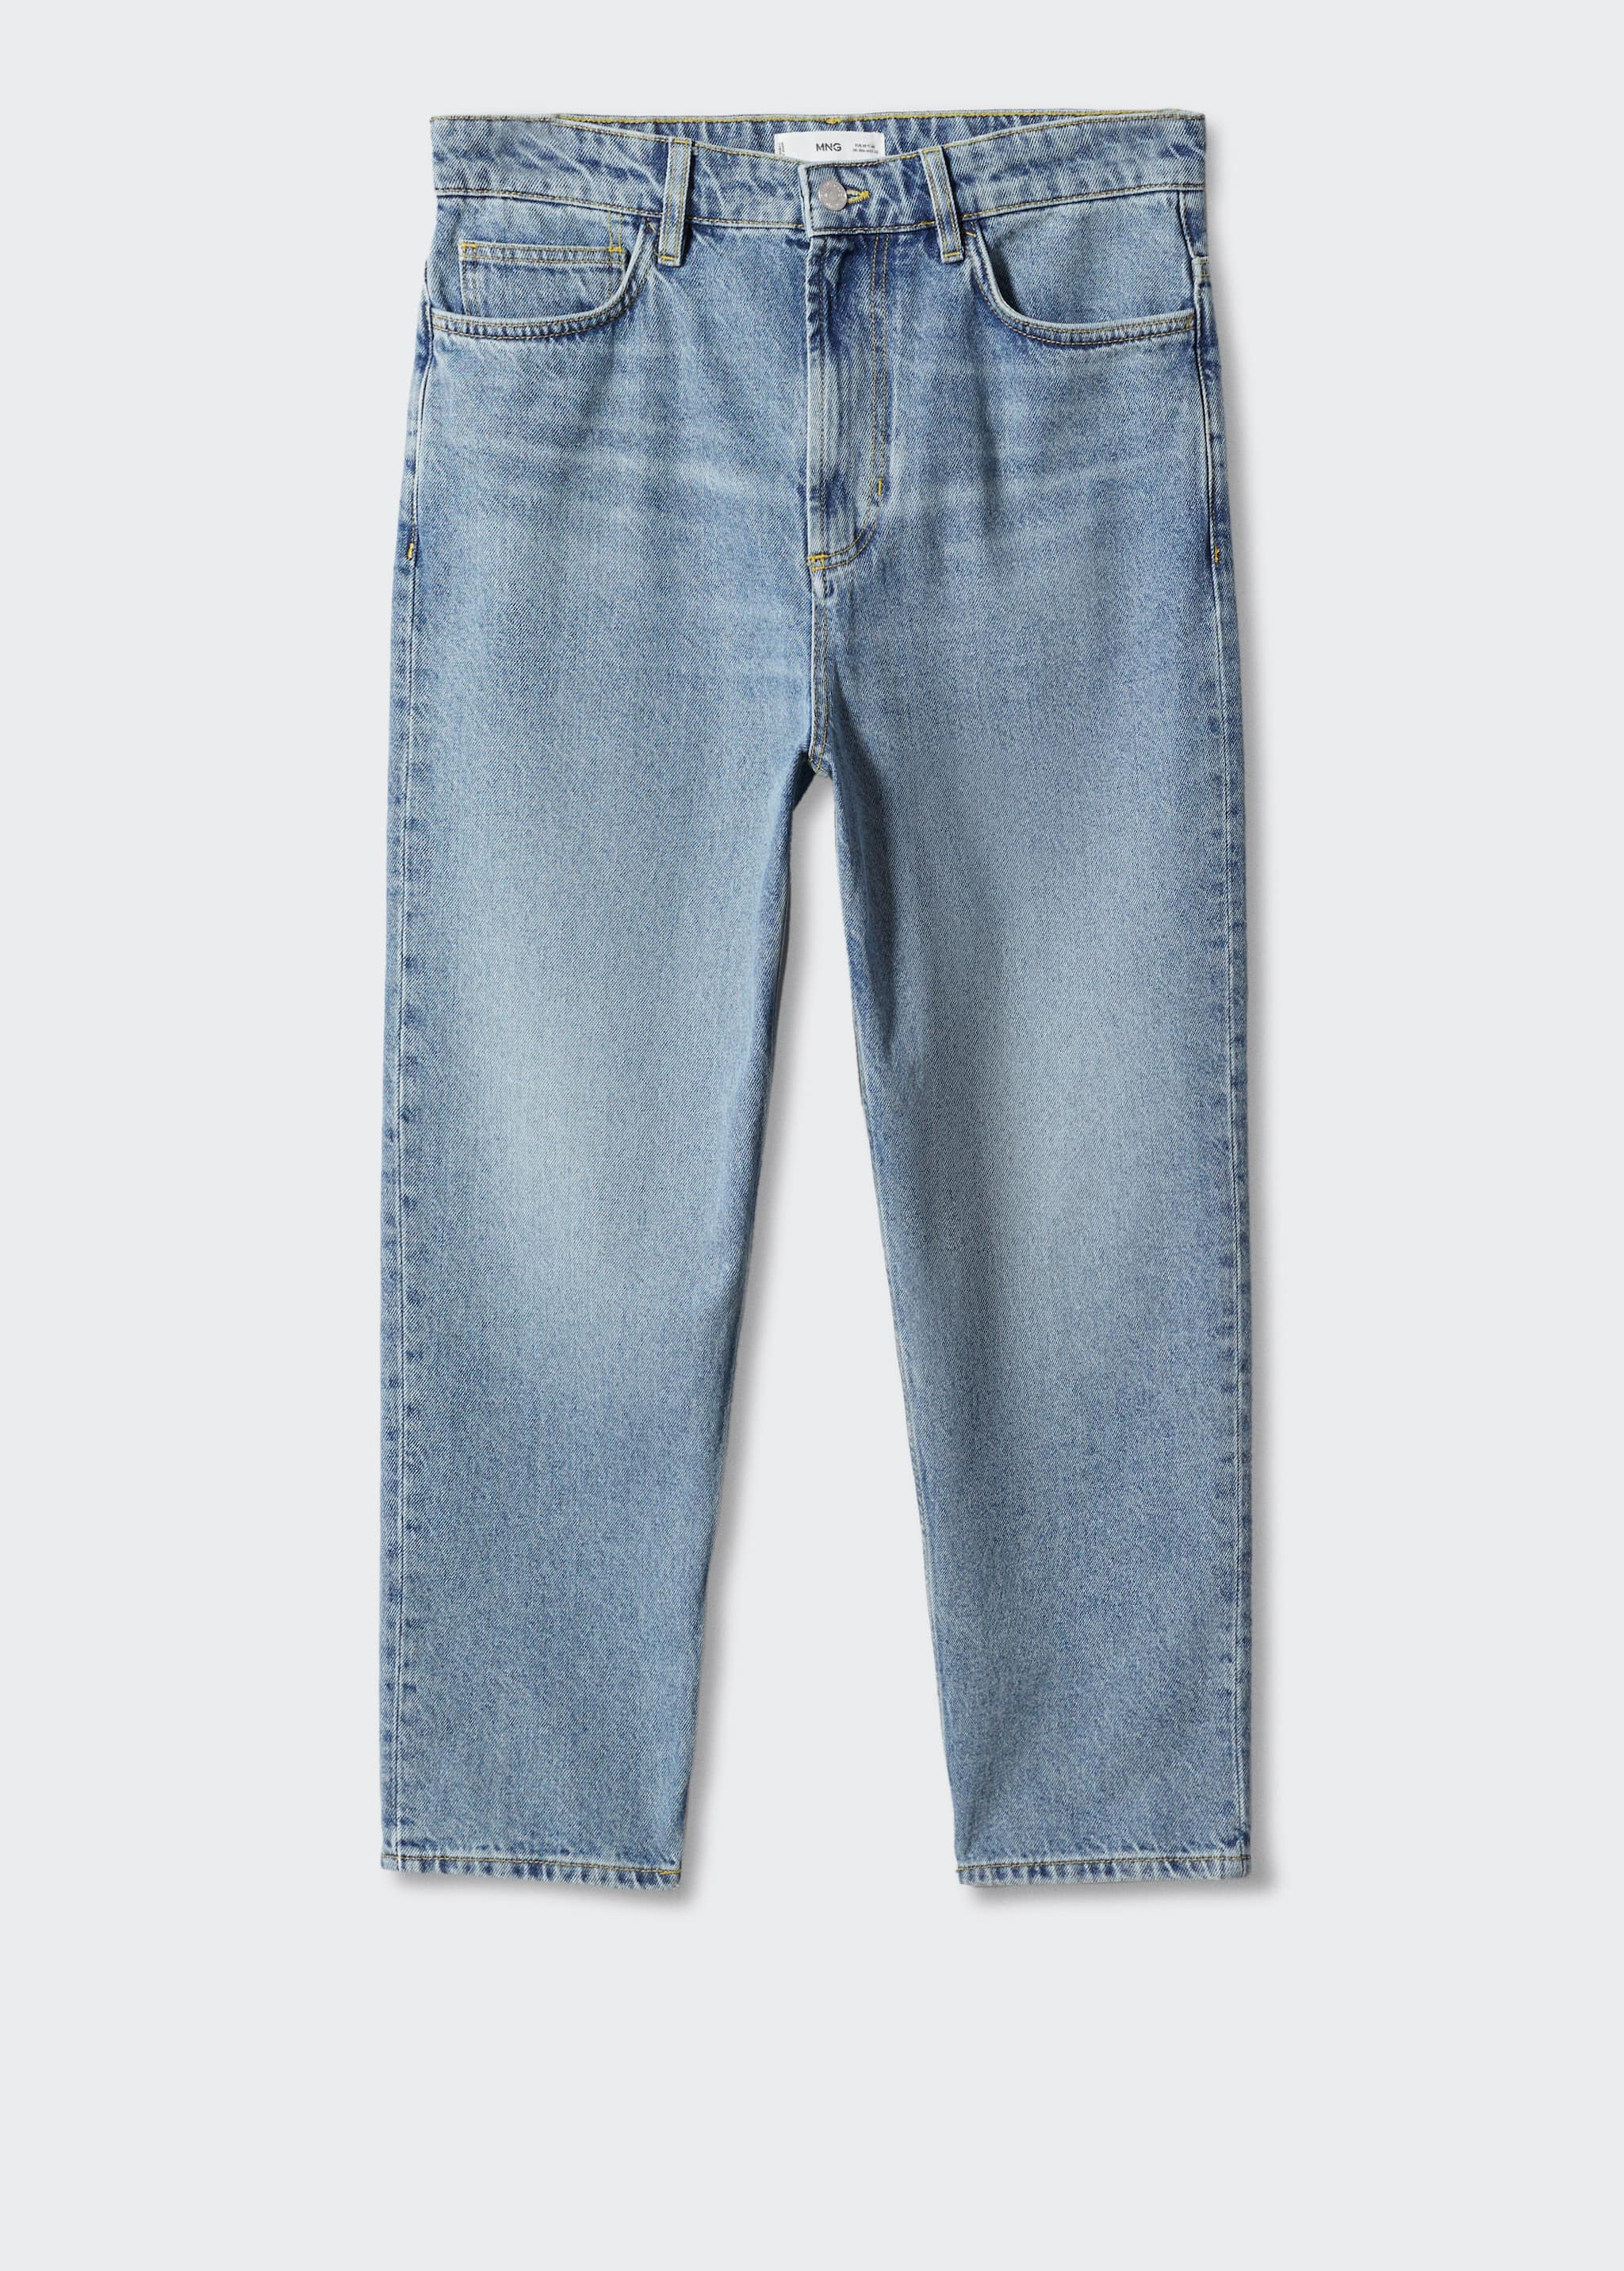 Tapered loose cropped jeans - Article without model